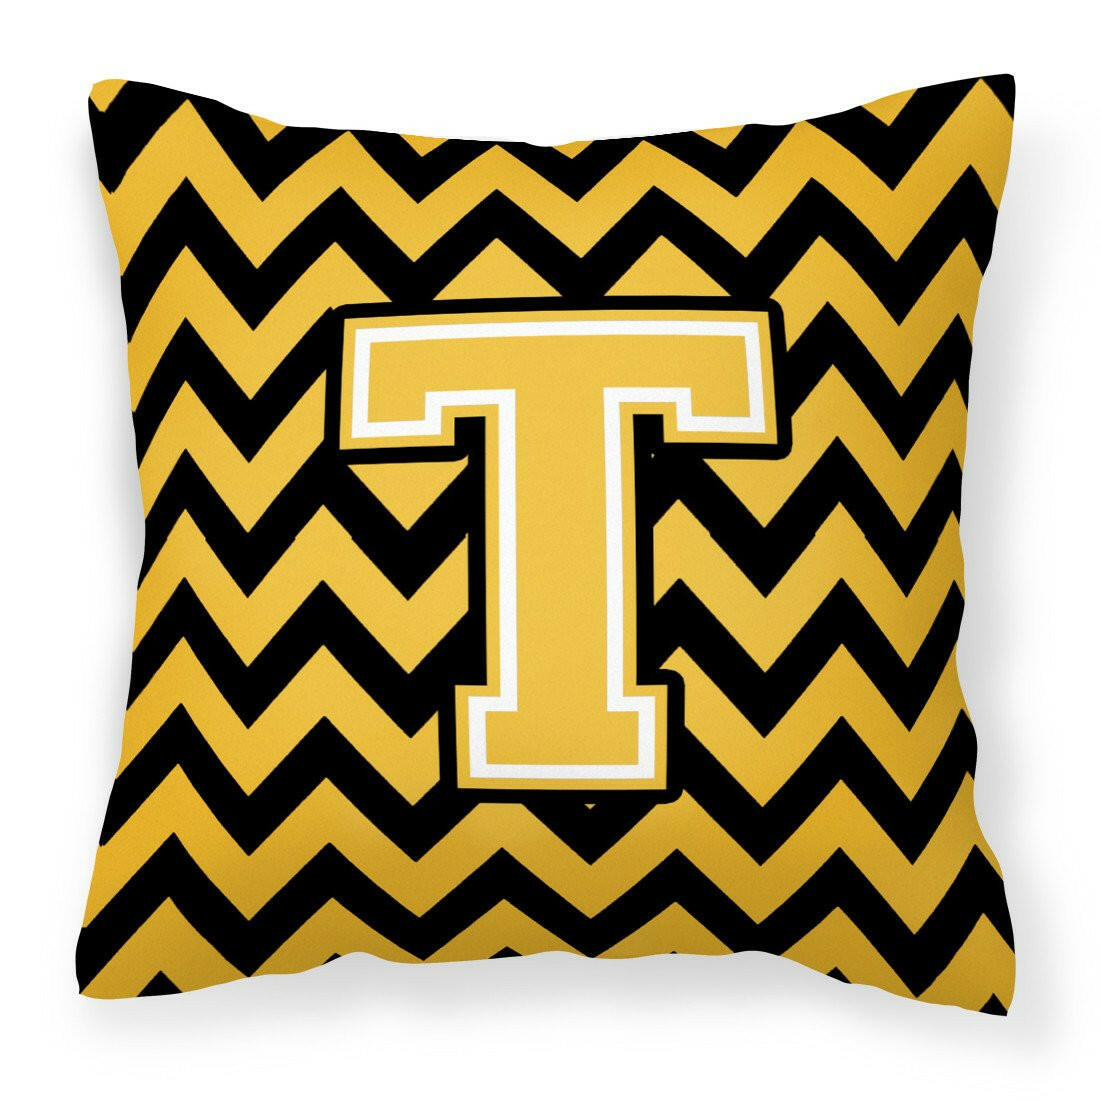 Letter T Chevron Black and Gold Fabric Decorative Pillow CJ1053-TPW1414 by Caroline's Treasures